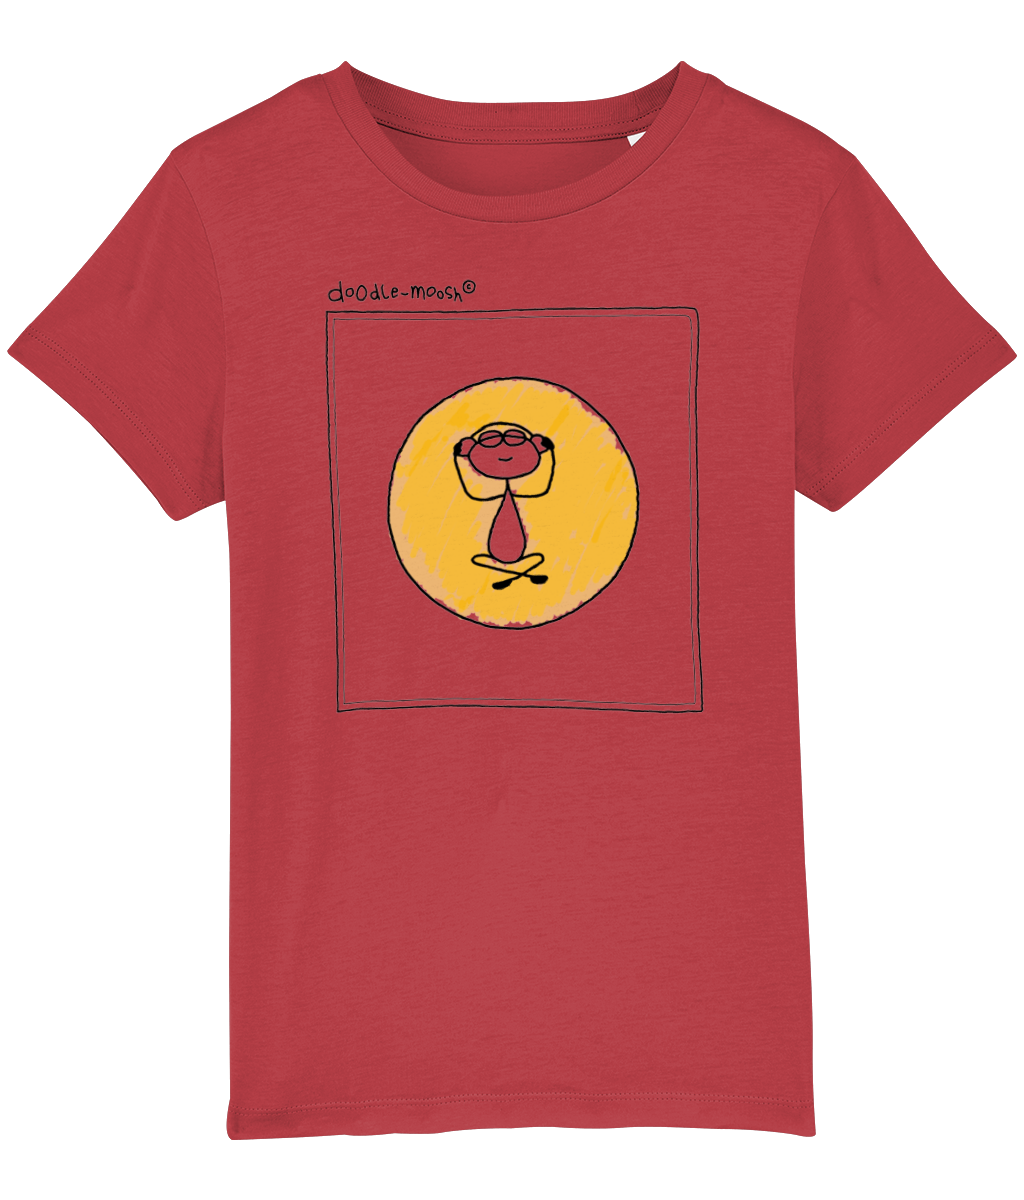 tuned in t-shirt, red with black, colourful  drawing